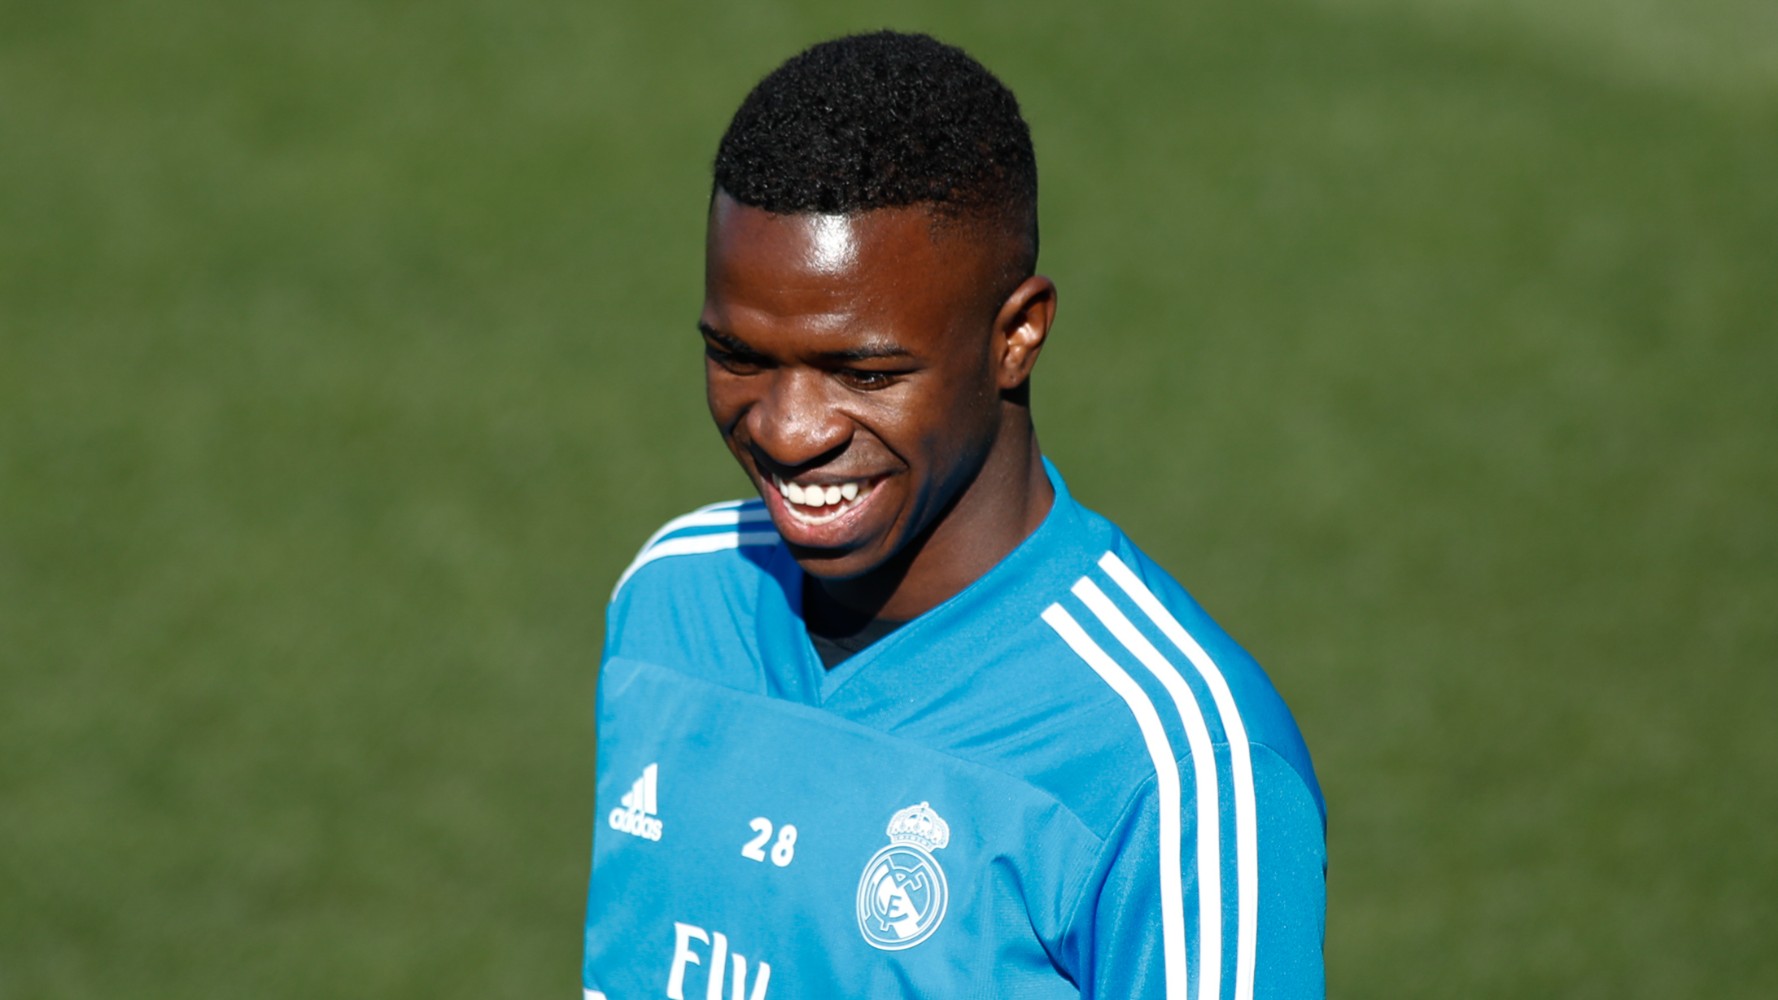 Real Madrid rule out Vinicius' transfer in January despite Zidane's decisions